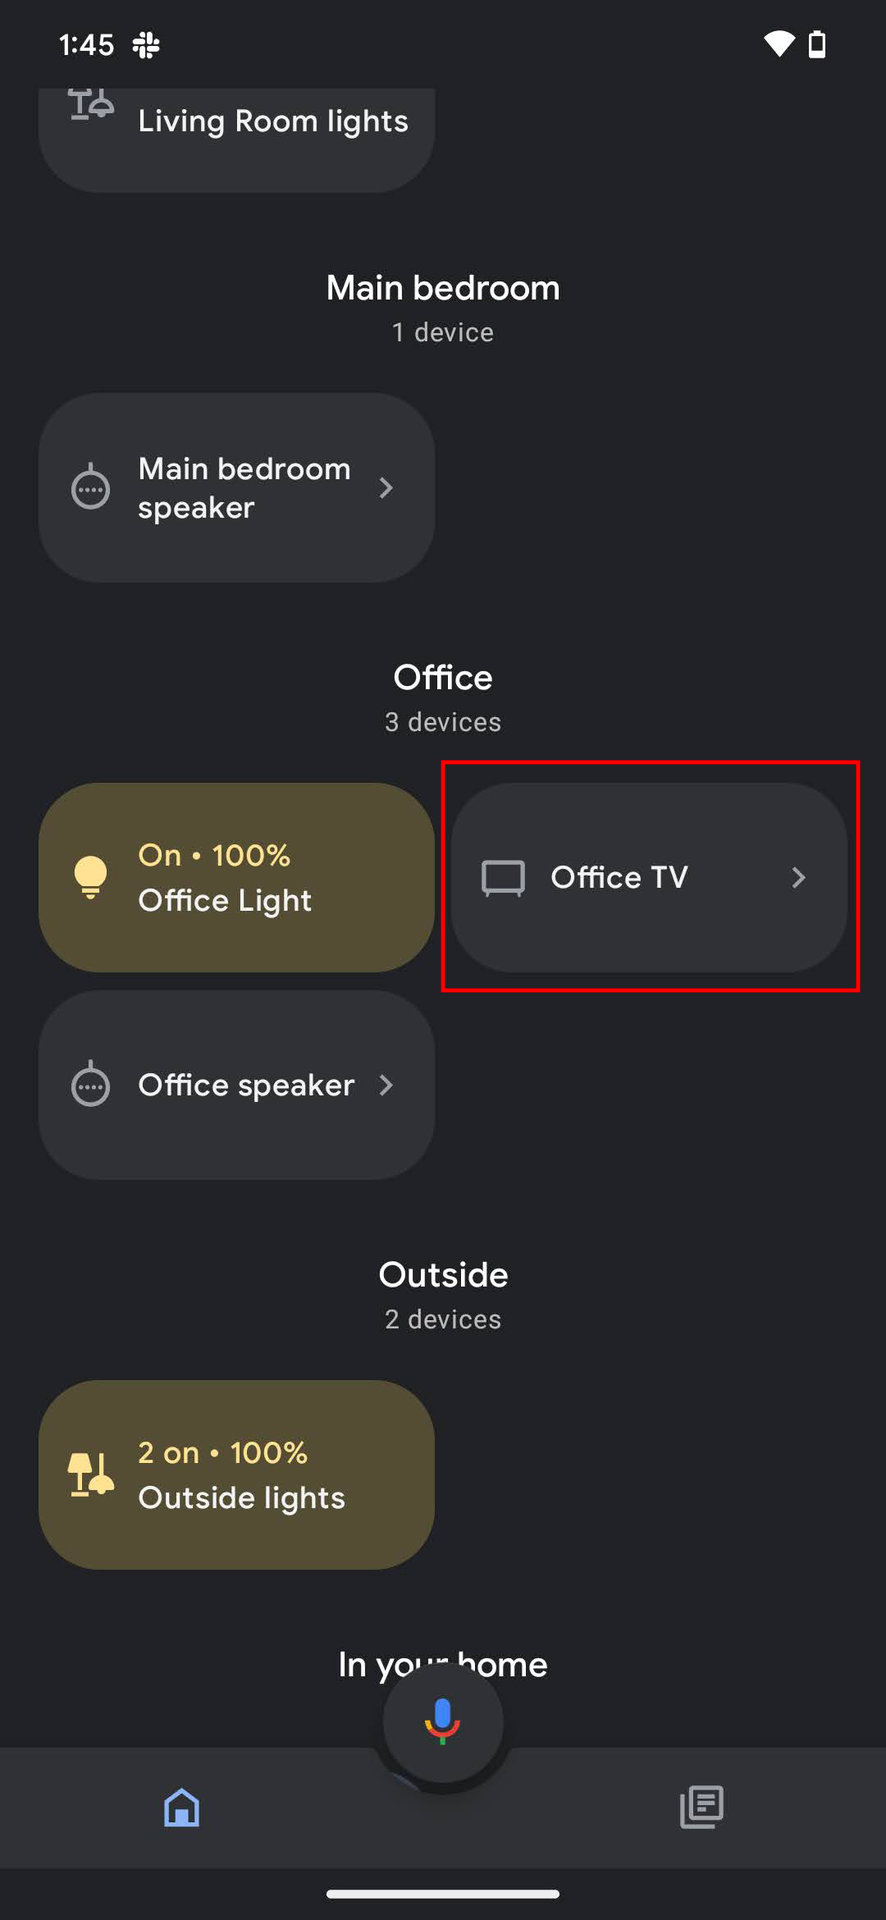 How to set up Guest Mode on Chromecast 1